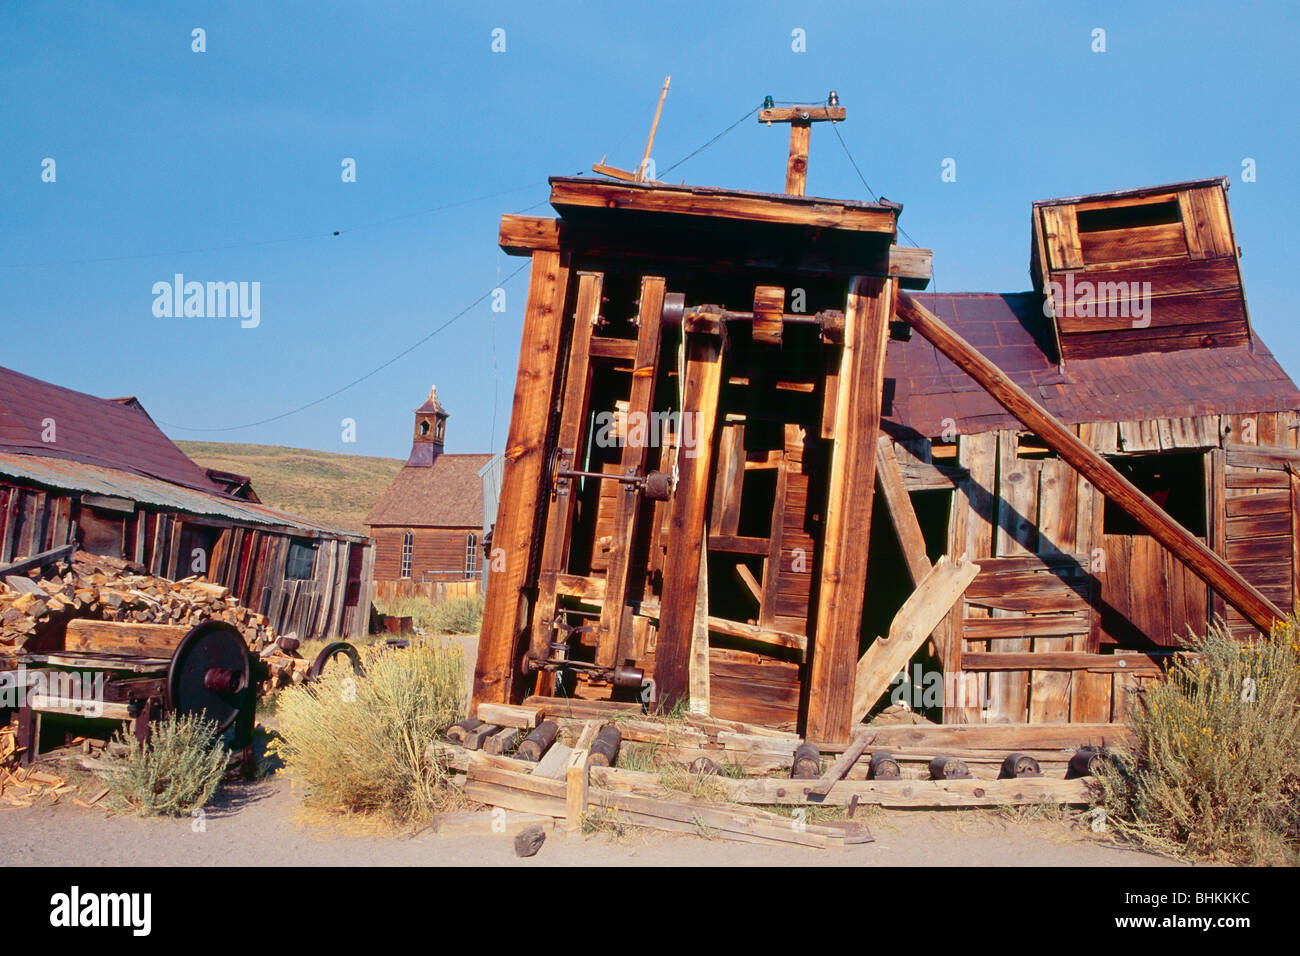 Sawmill of Bodie, Bodie State Historic Park, California Stock Photo